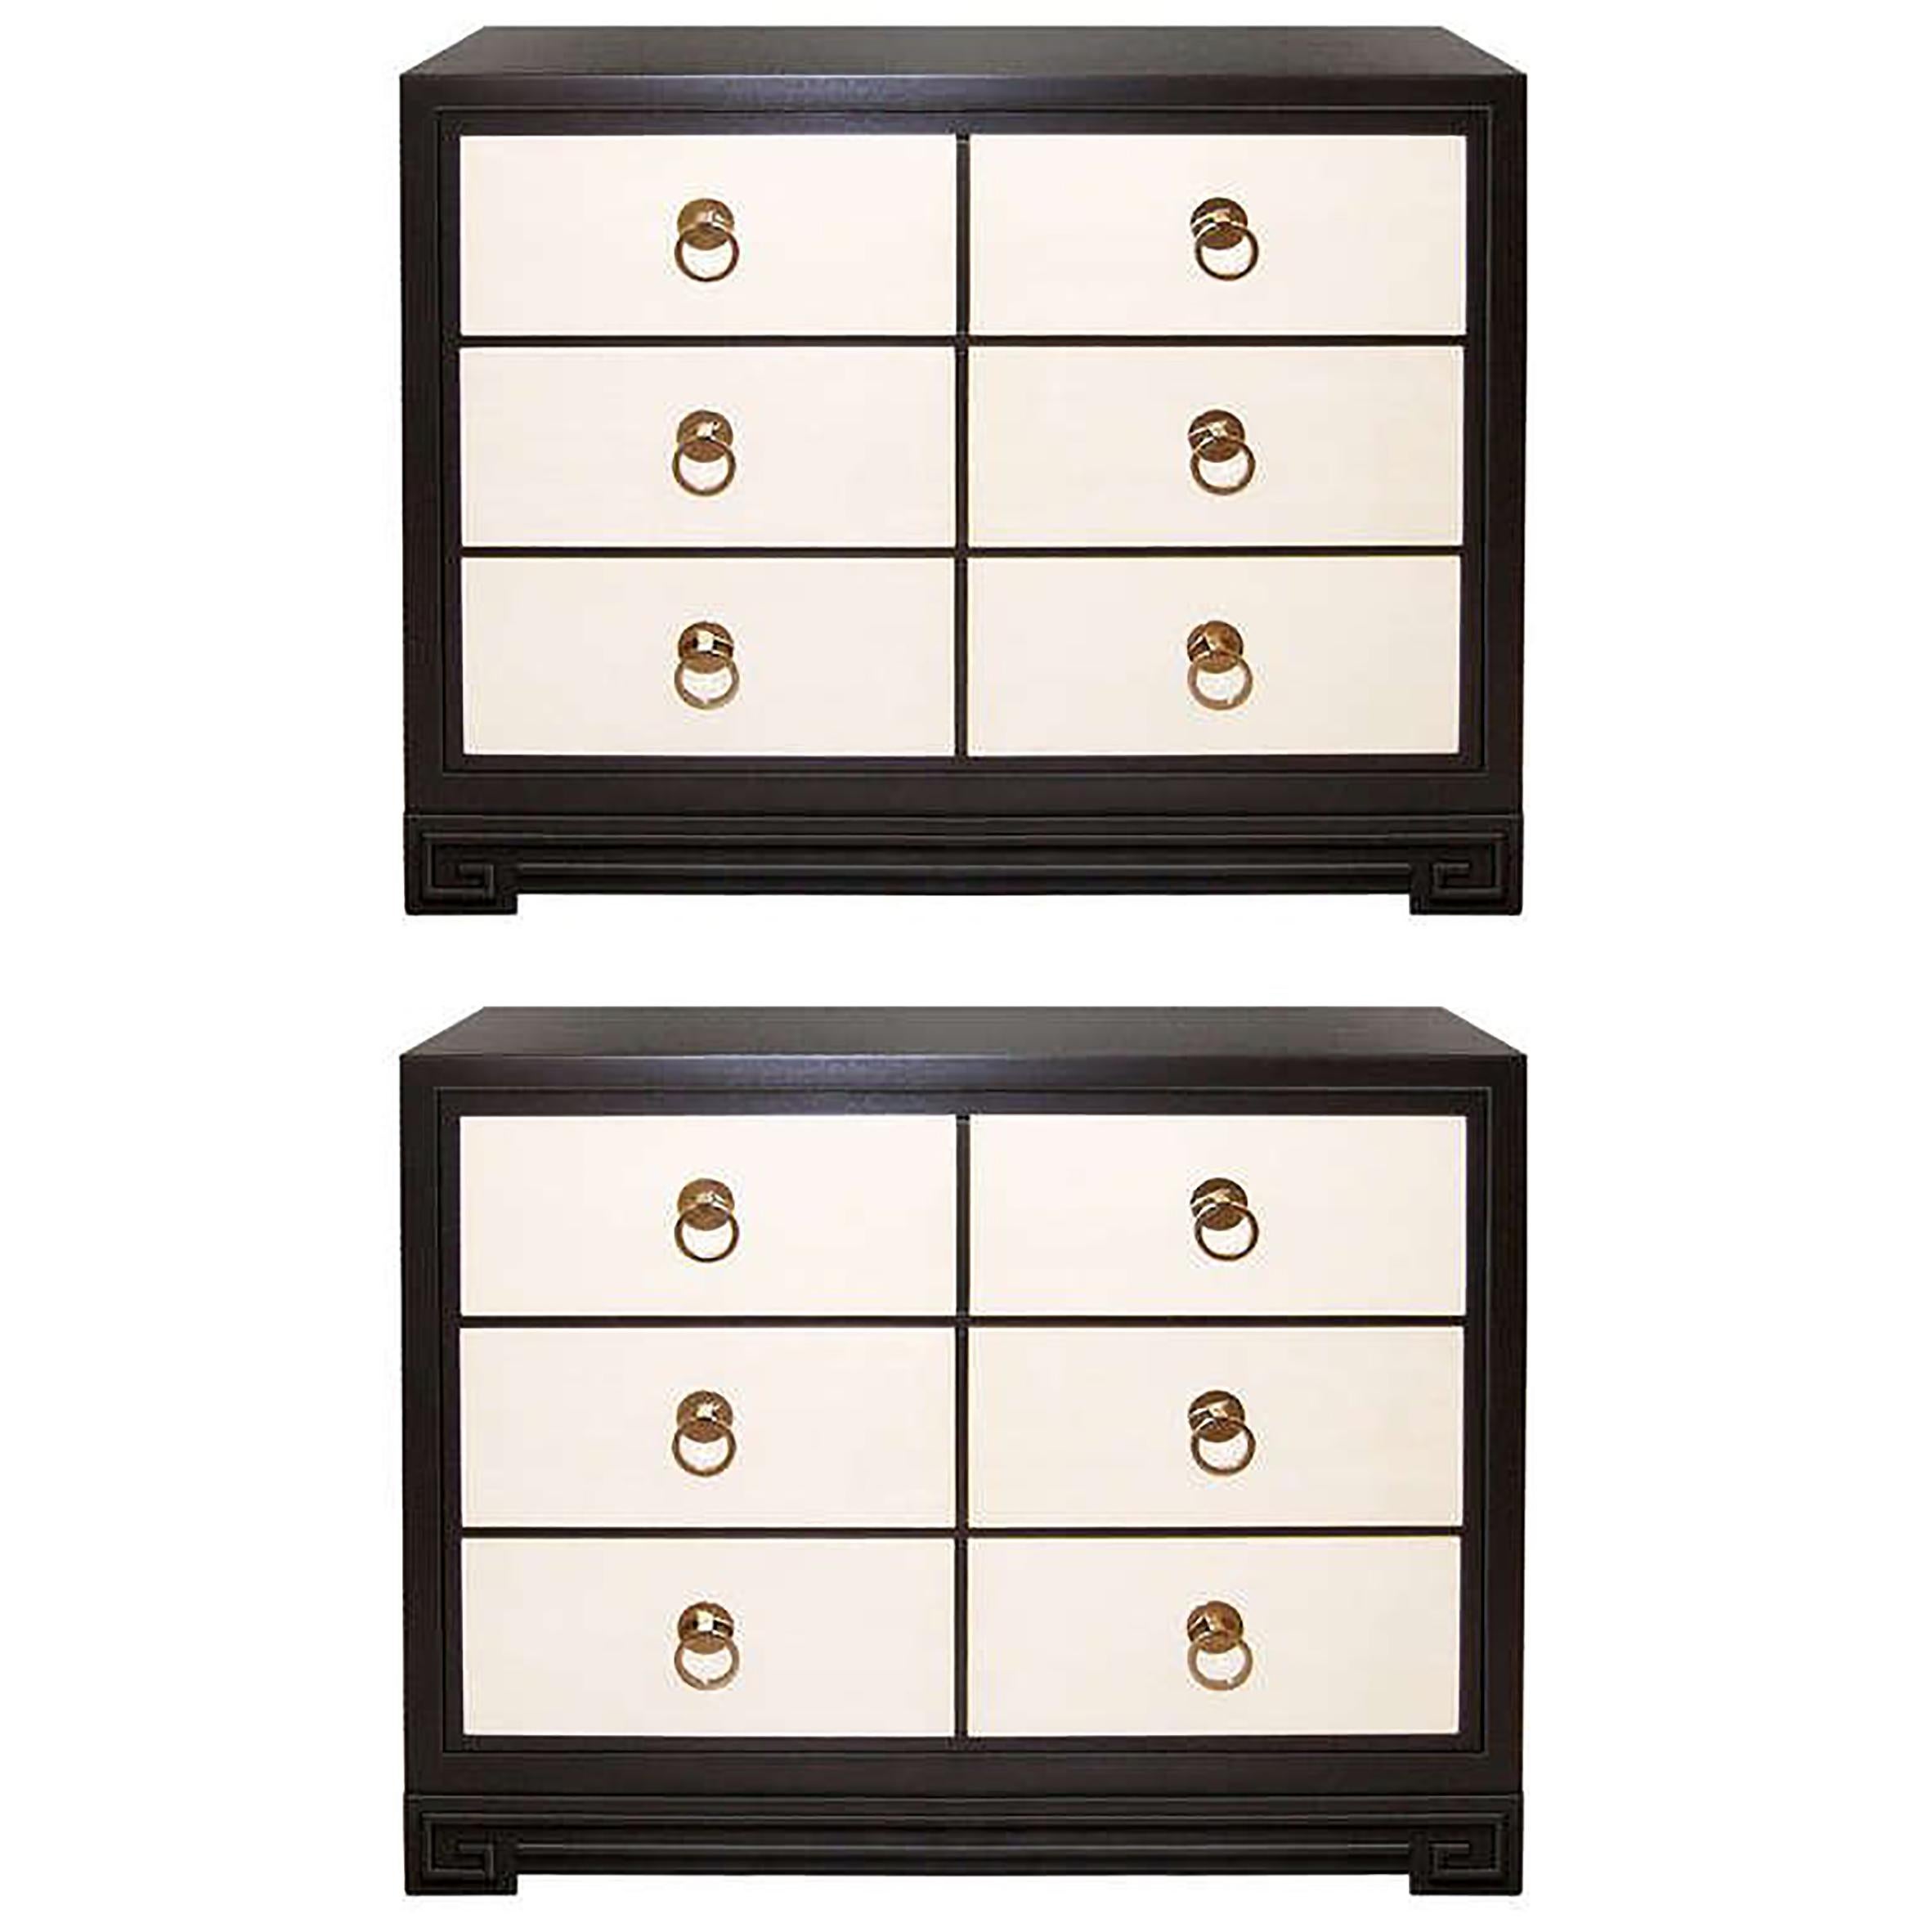 A pair of 3 drawer ebonized mahogany dressers with parchment covered drawer fronts and brass pulls. Base of dresser have raised Greek key motif by John Stuart, American C. 1940's